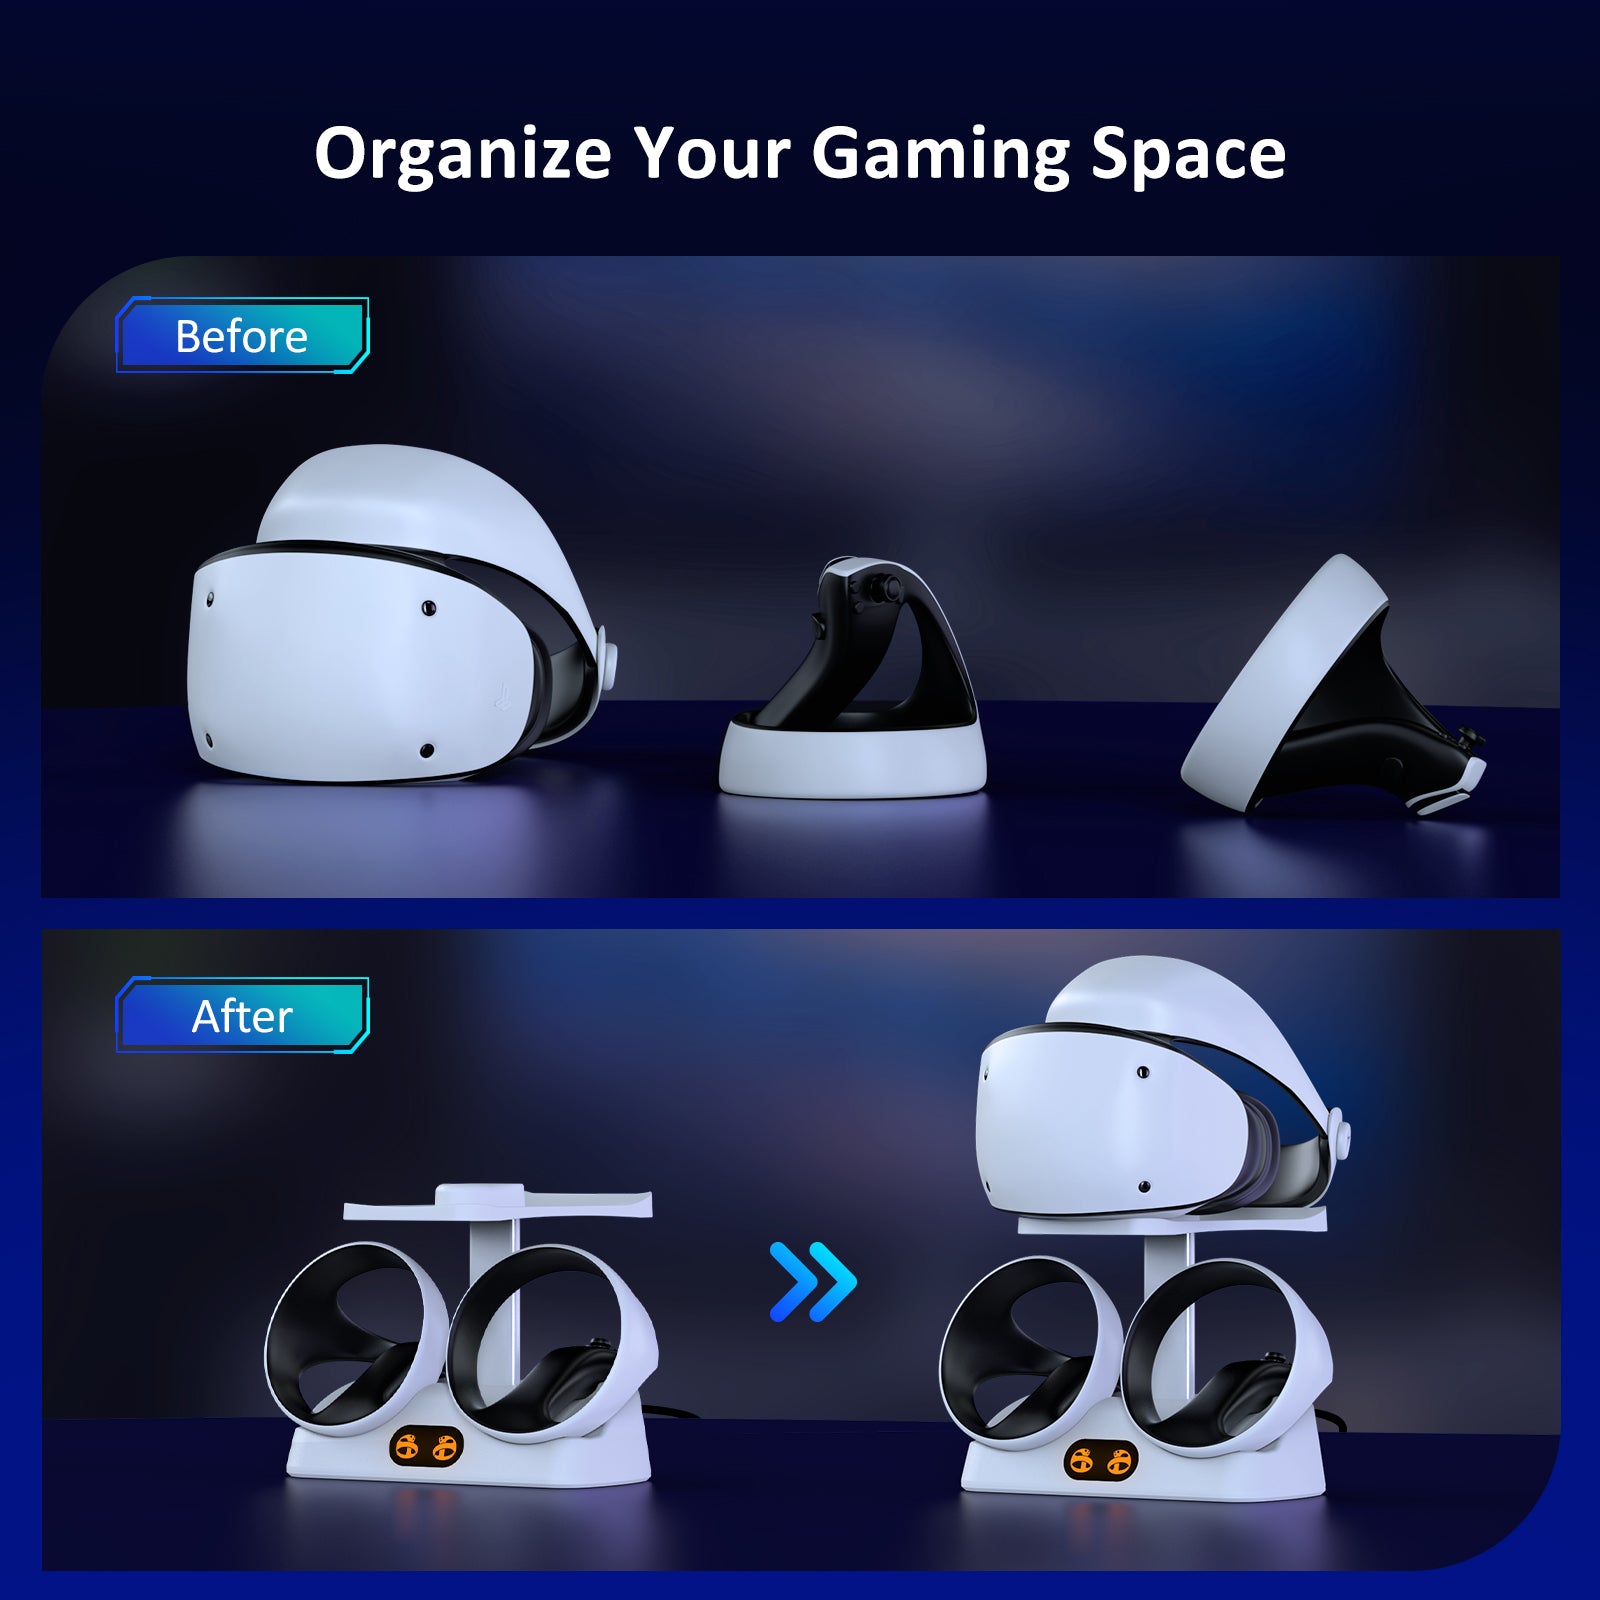 Controller Charging Station with storage function for better organization of your gaming devices.